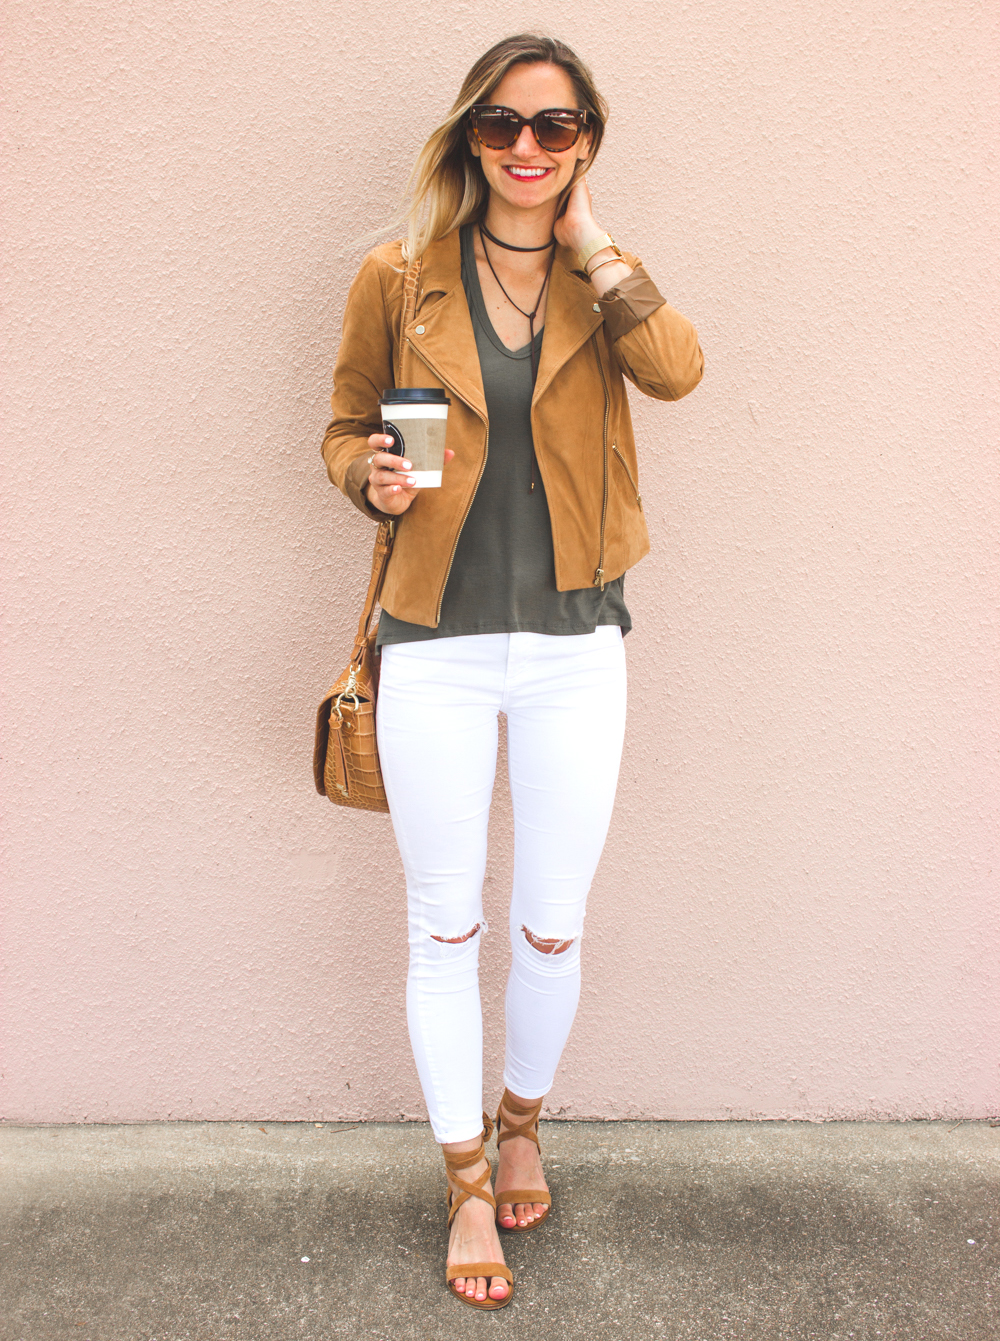 livvyland-blog-olivia-watson-boho-ootd-nordstrom-anniversary-sale-must-haves-what-to-buy-suede-tan-jacket-fall-summer-outfit-cluse-gold-watch-1